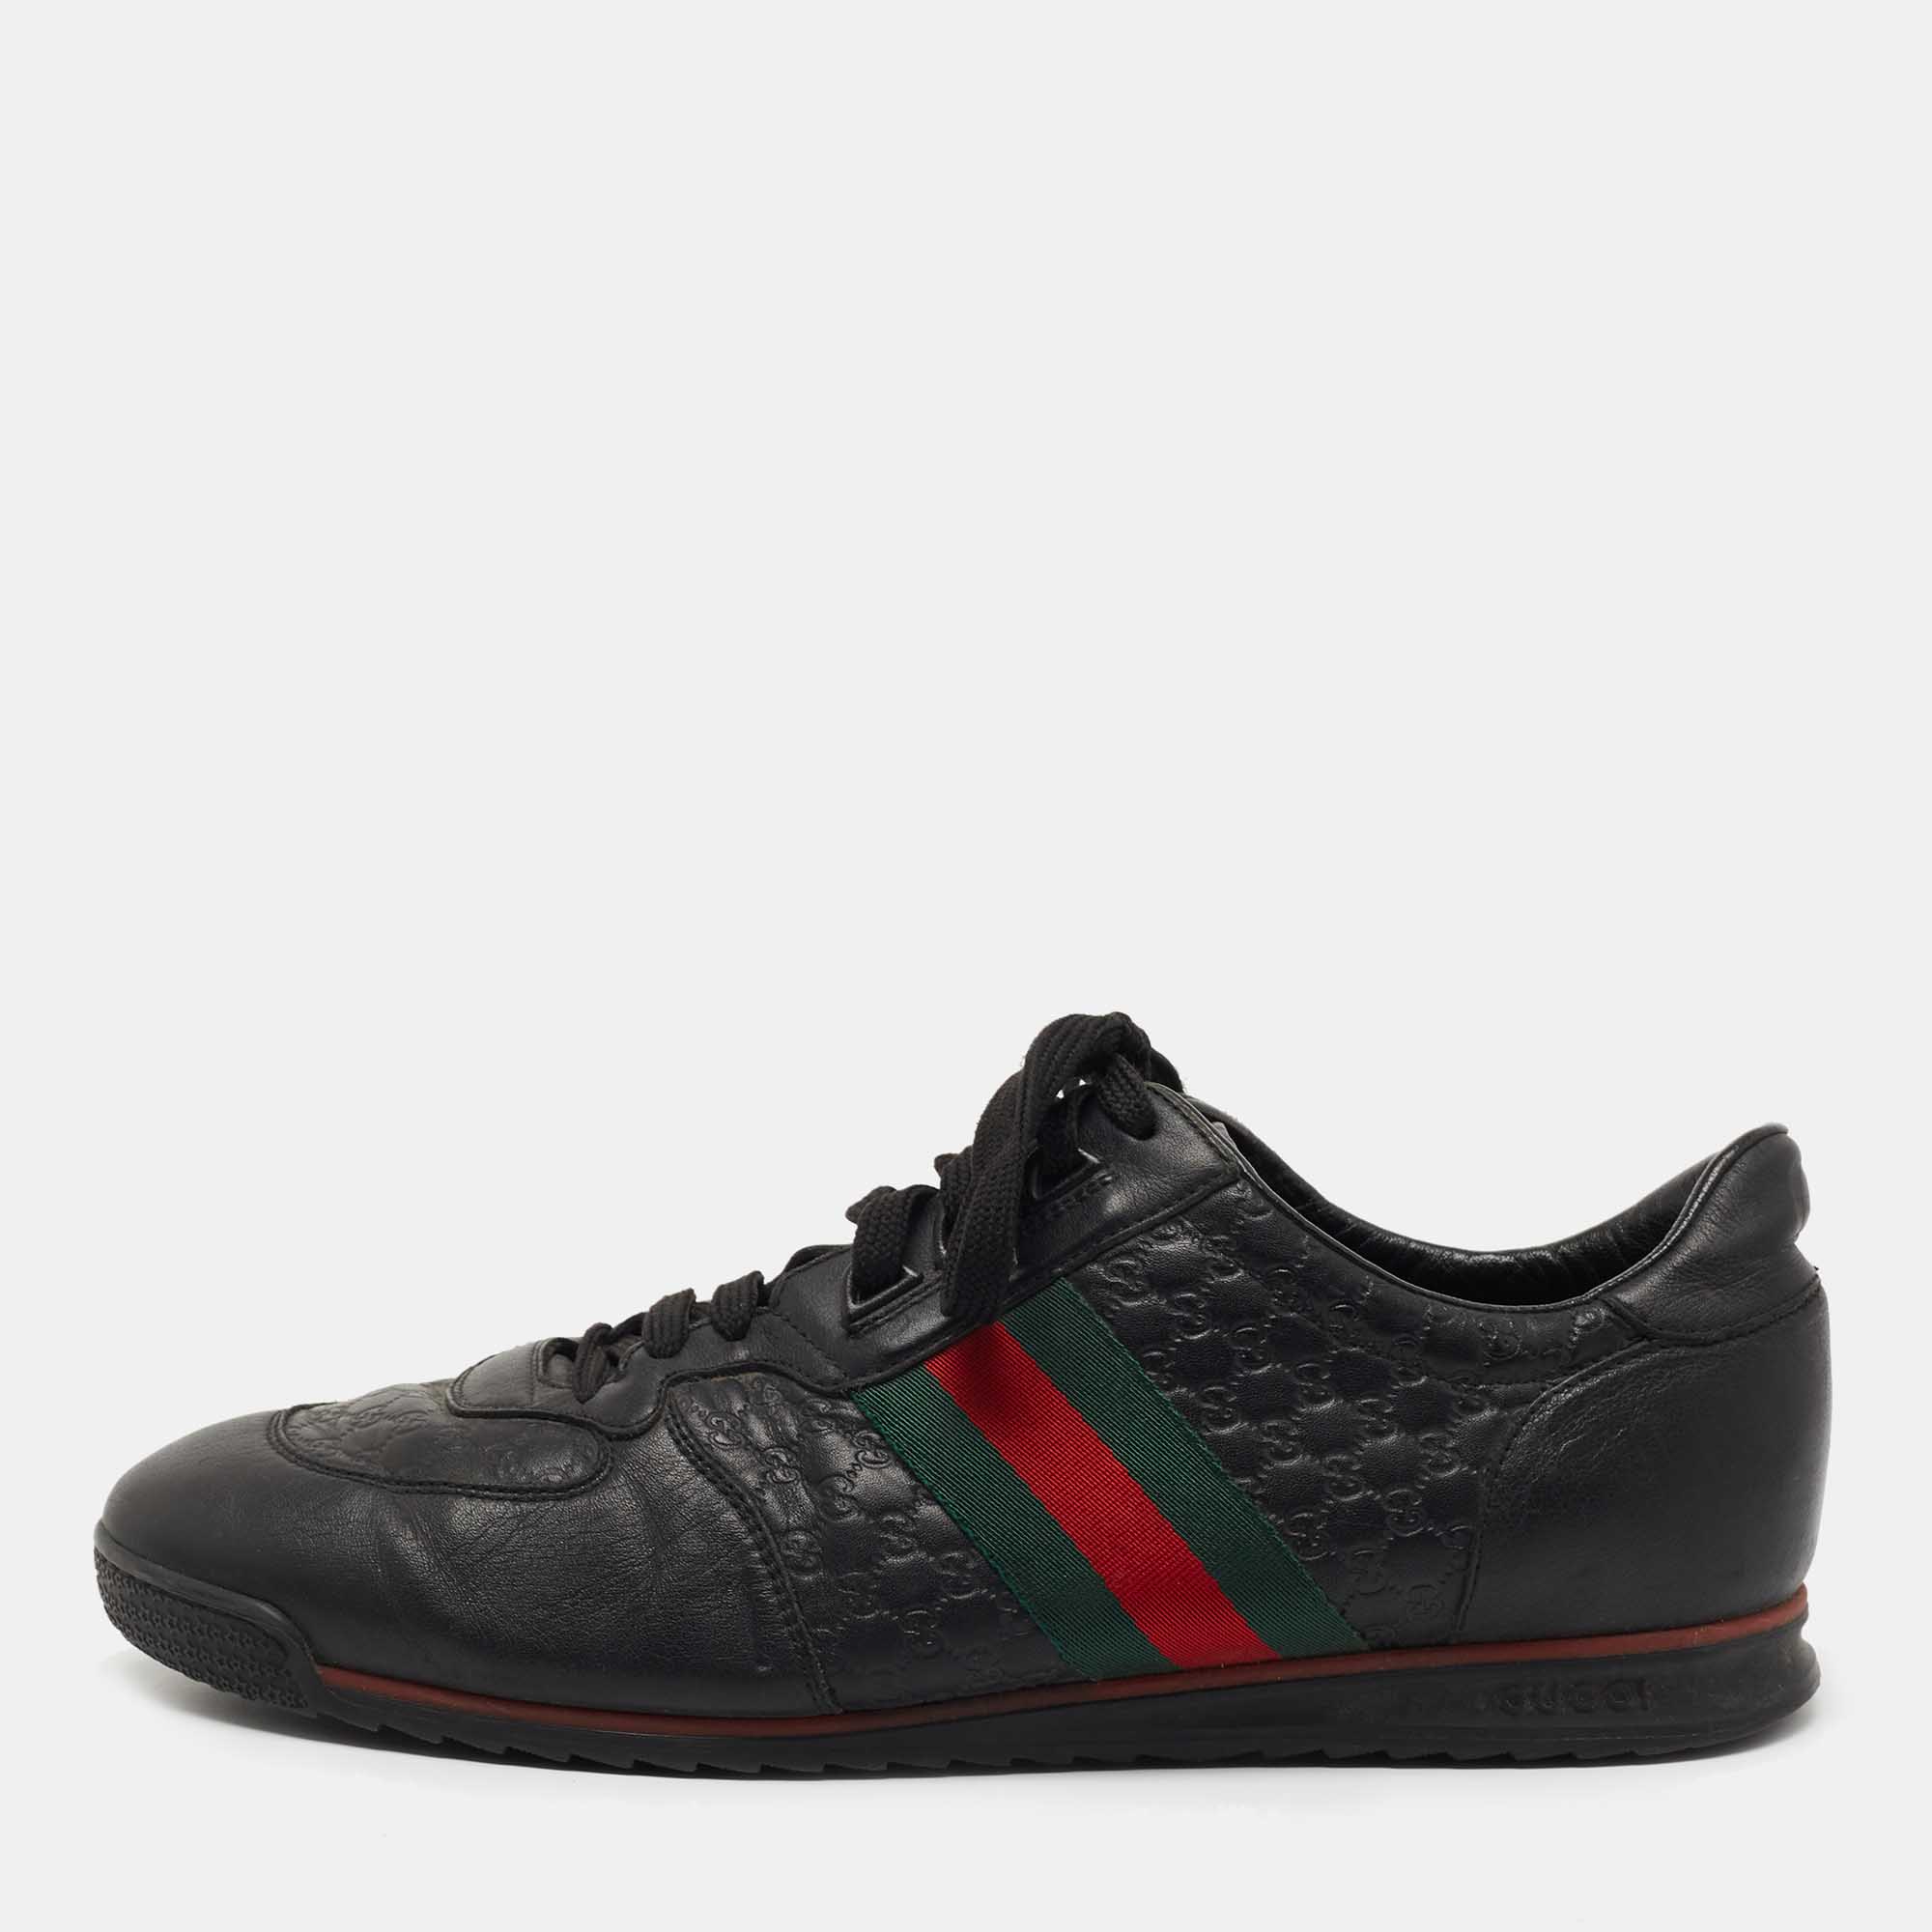 Pre-owned Gucci Black Microssima Leather Web Low Top Sneakers Size 44.5